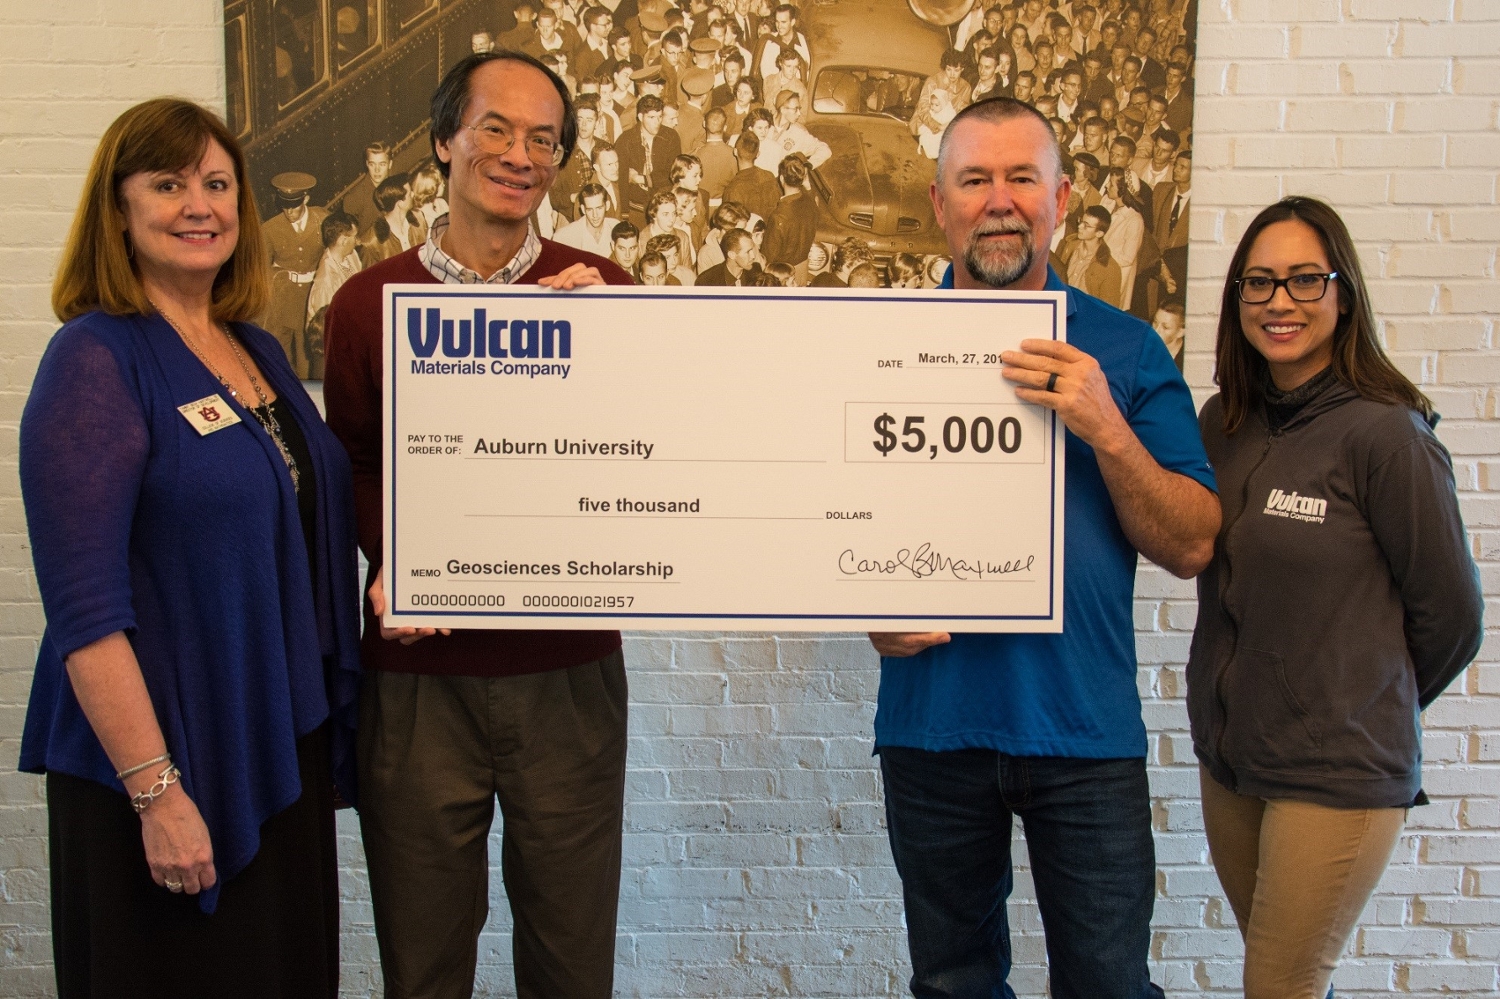 Vulcan donation check shown with $5,000.